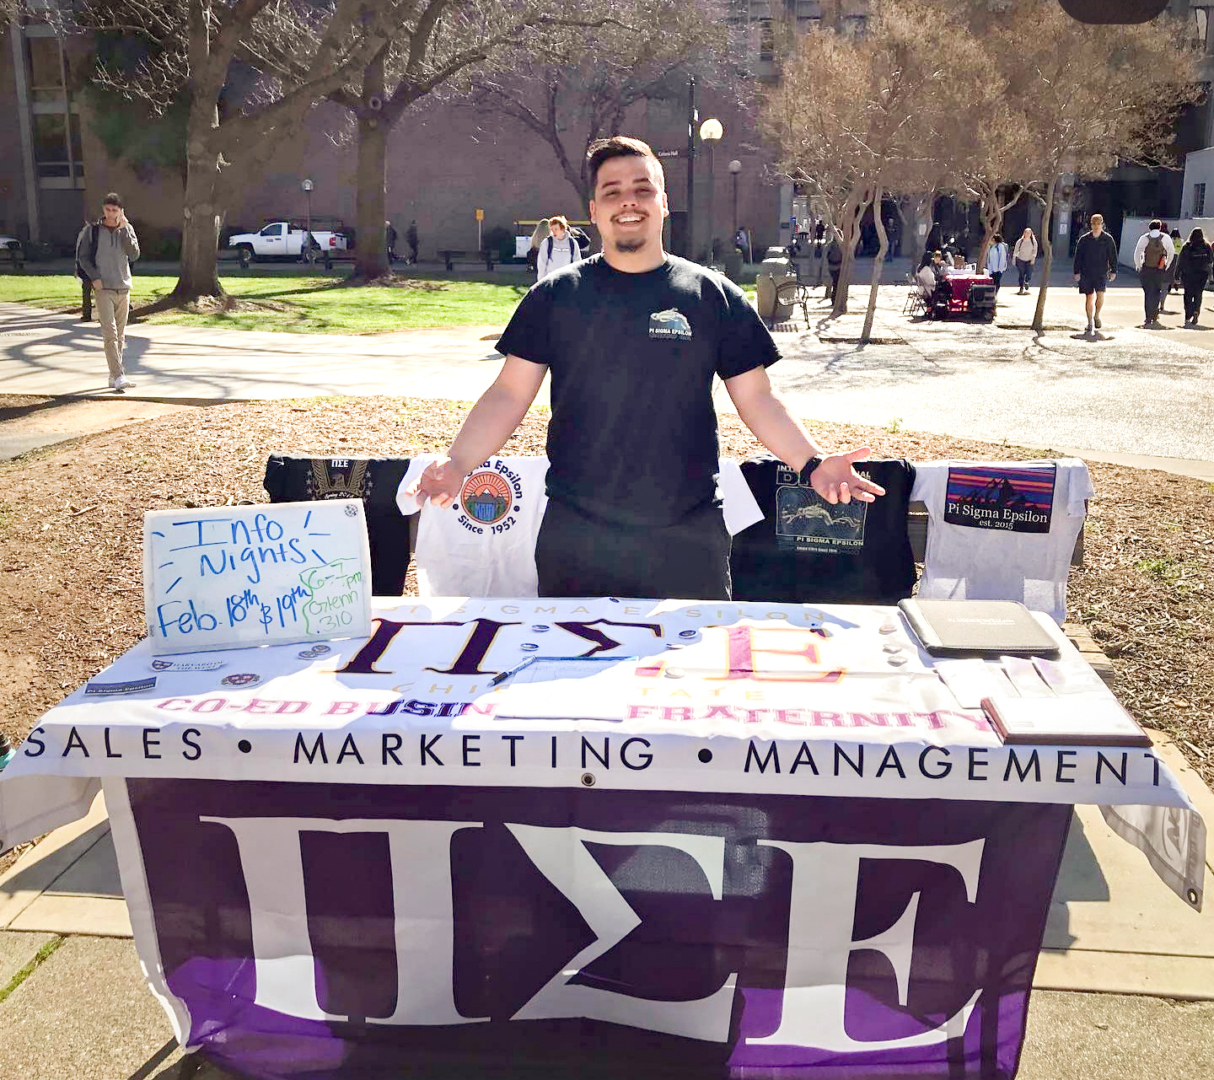 Ryan Lobsien stands in front of a table for Pi Sigma Epsilon.